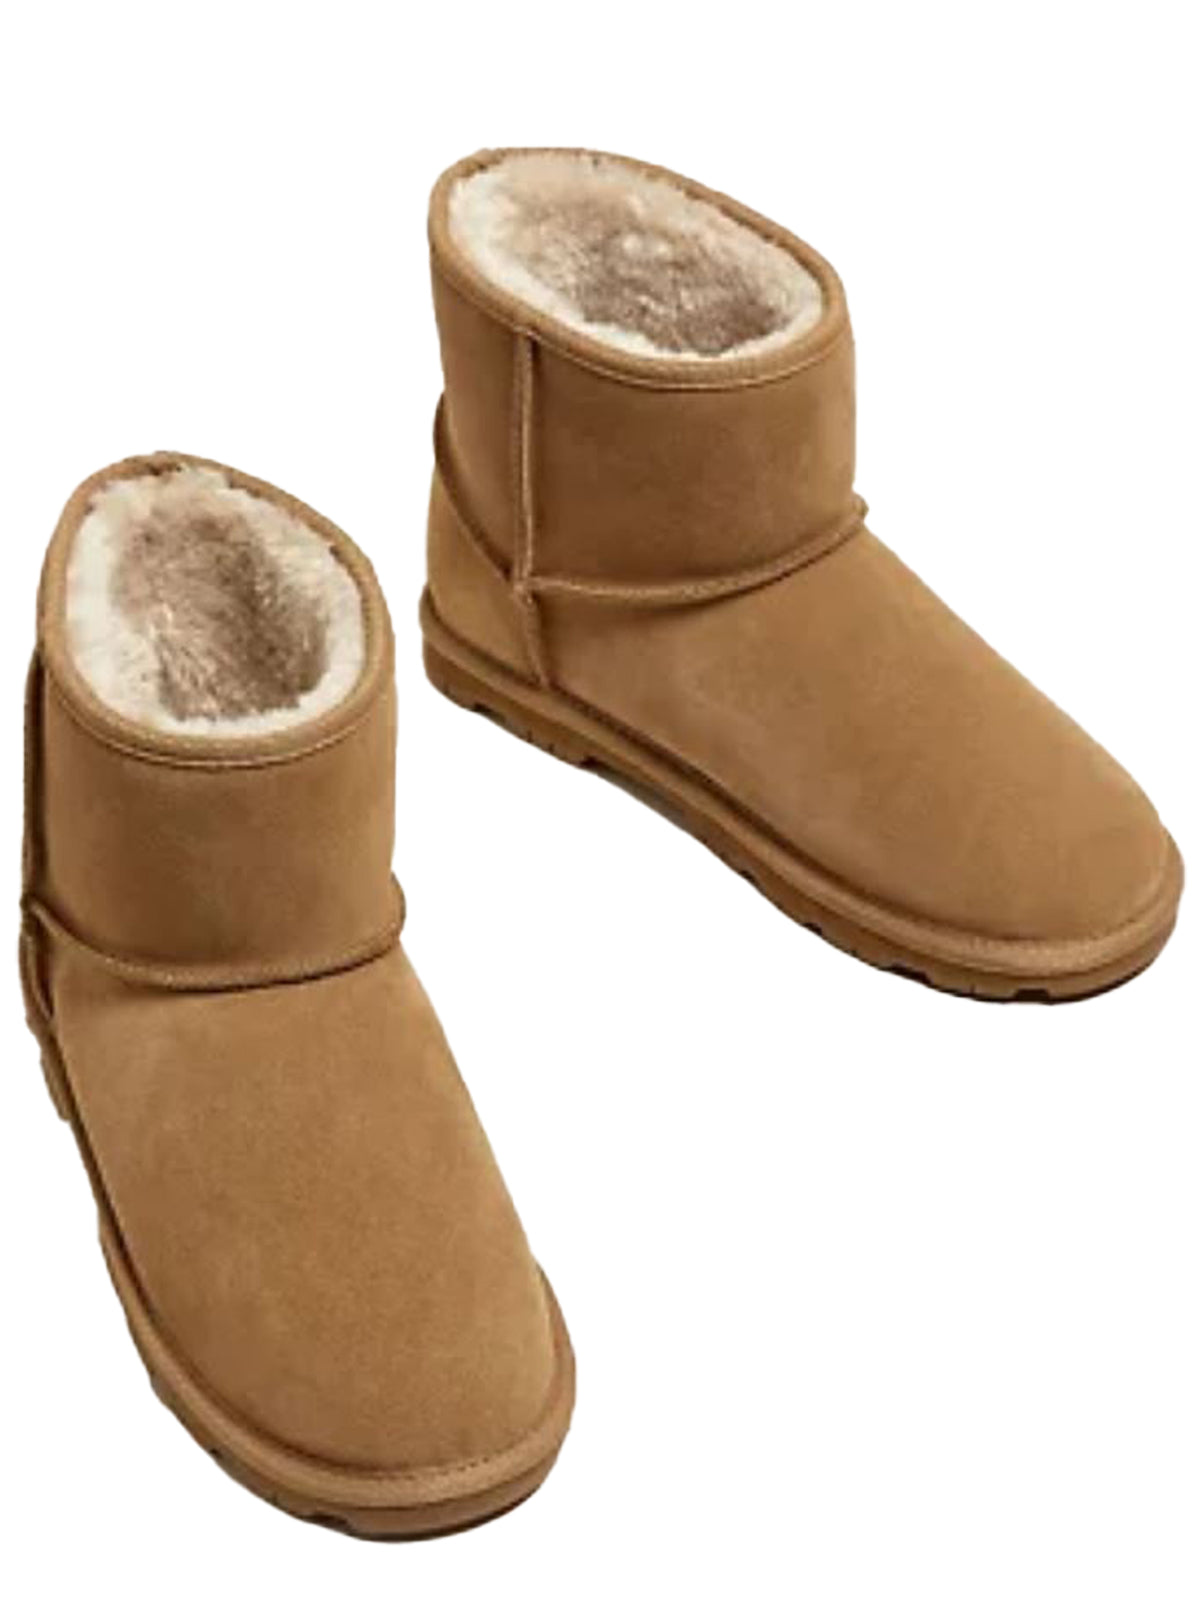 M&S WOMENS BOOTS M&S Womens Suede Boots | Faux Fur Lining GUEST BRAND RAWDENIM